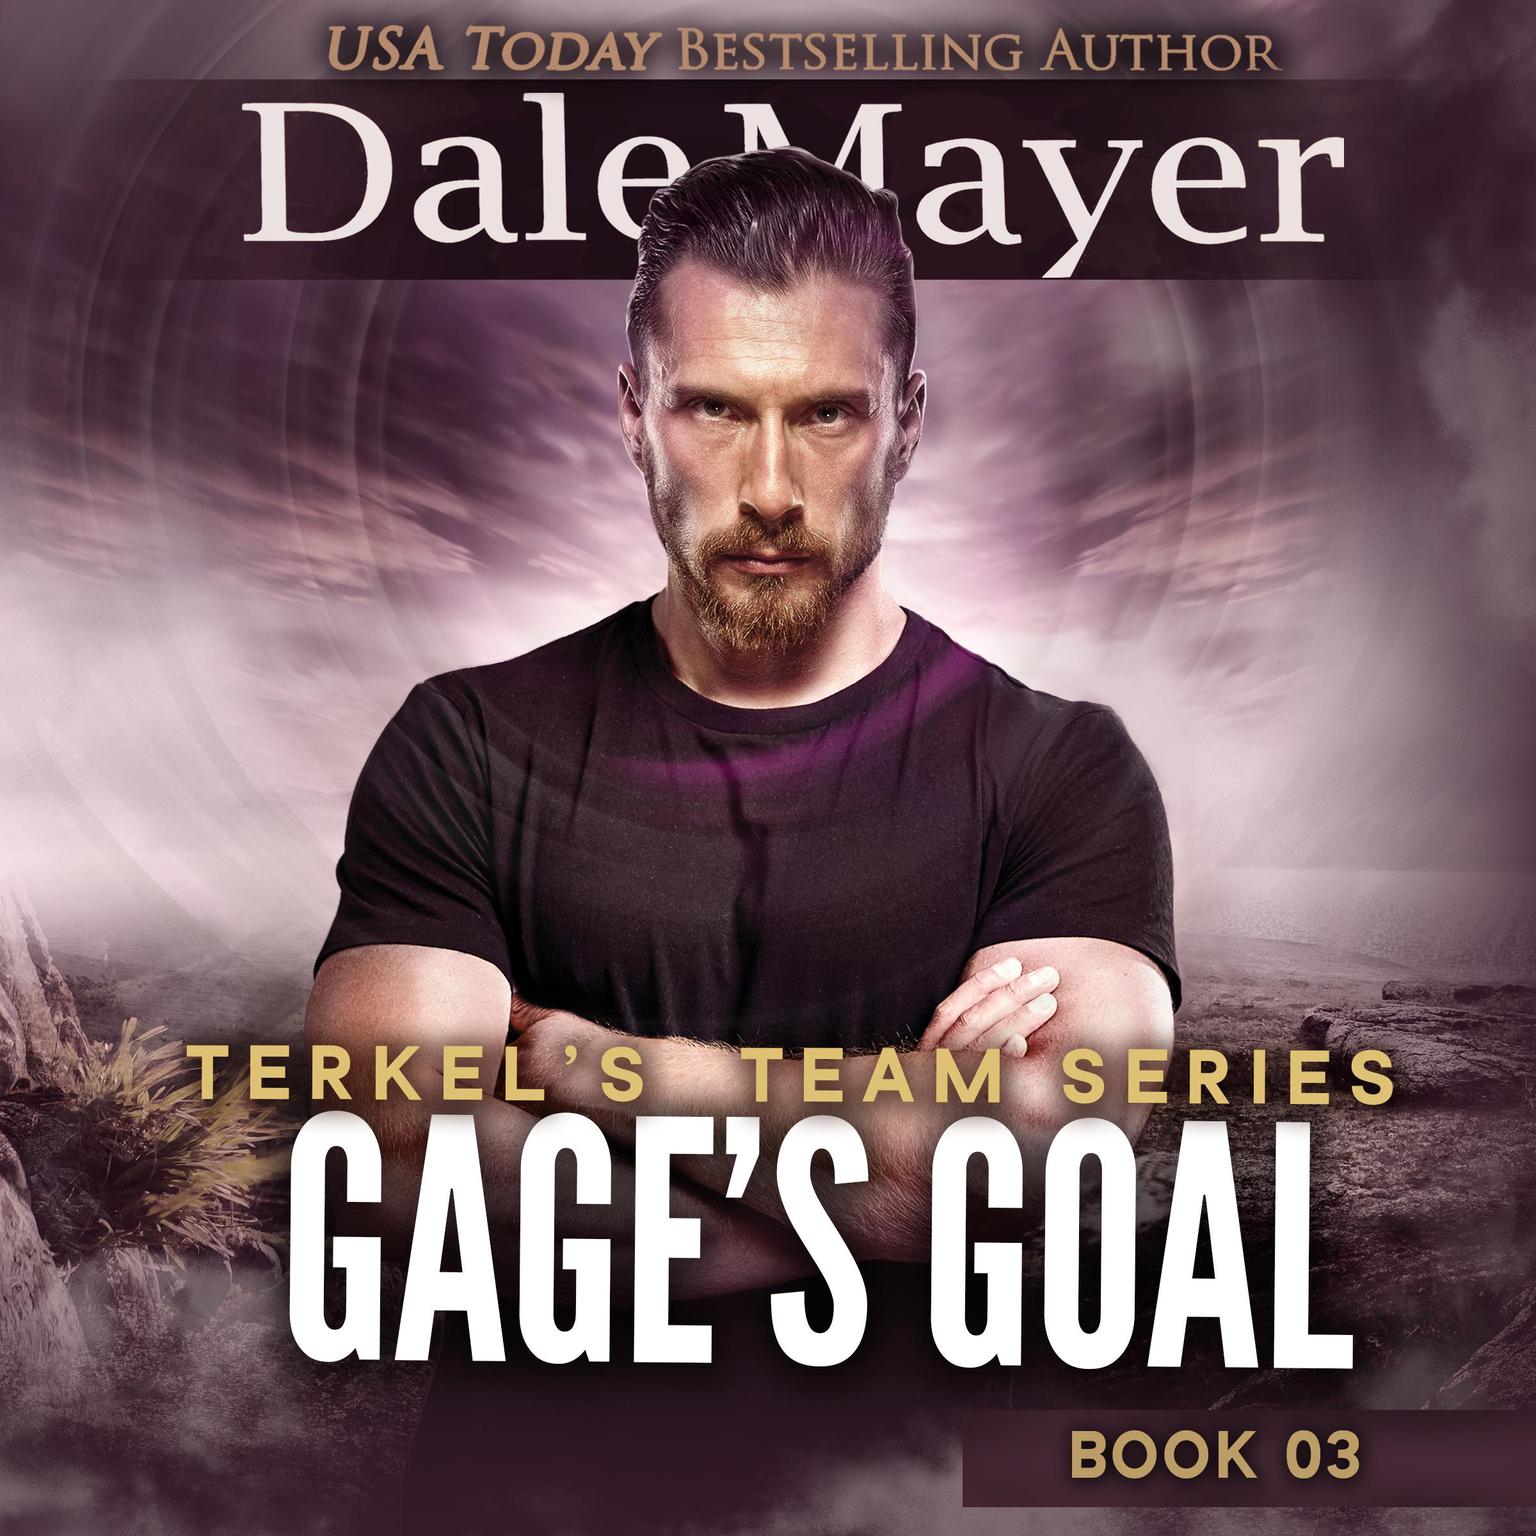 Gages Goal Audiobook, by Dale Mayer